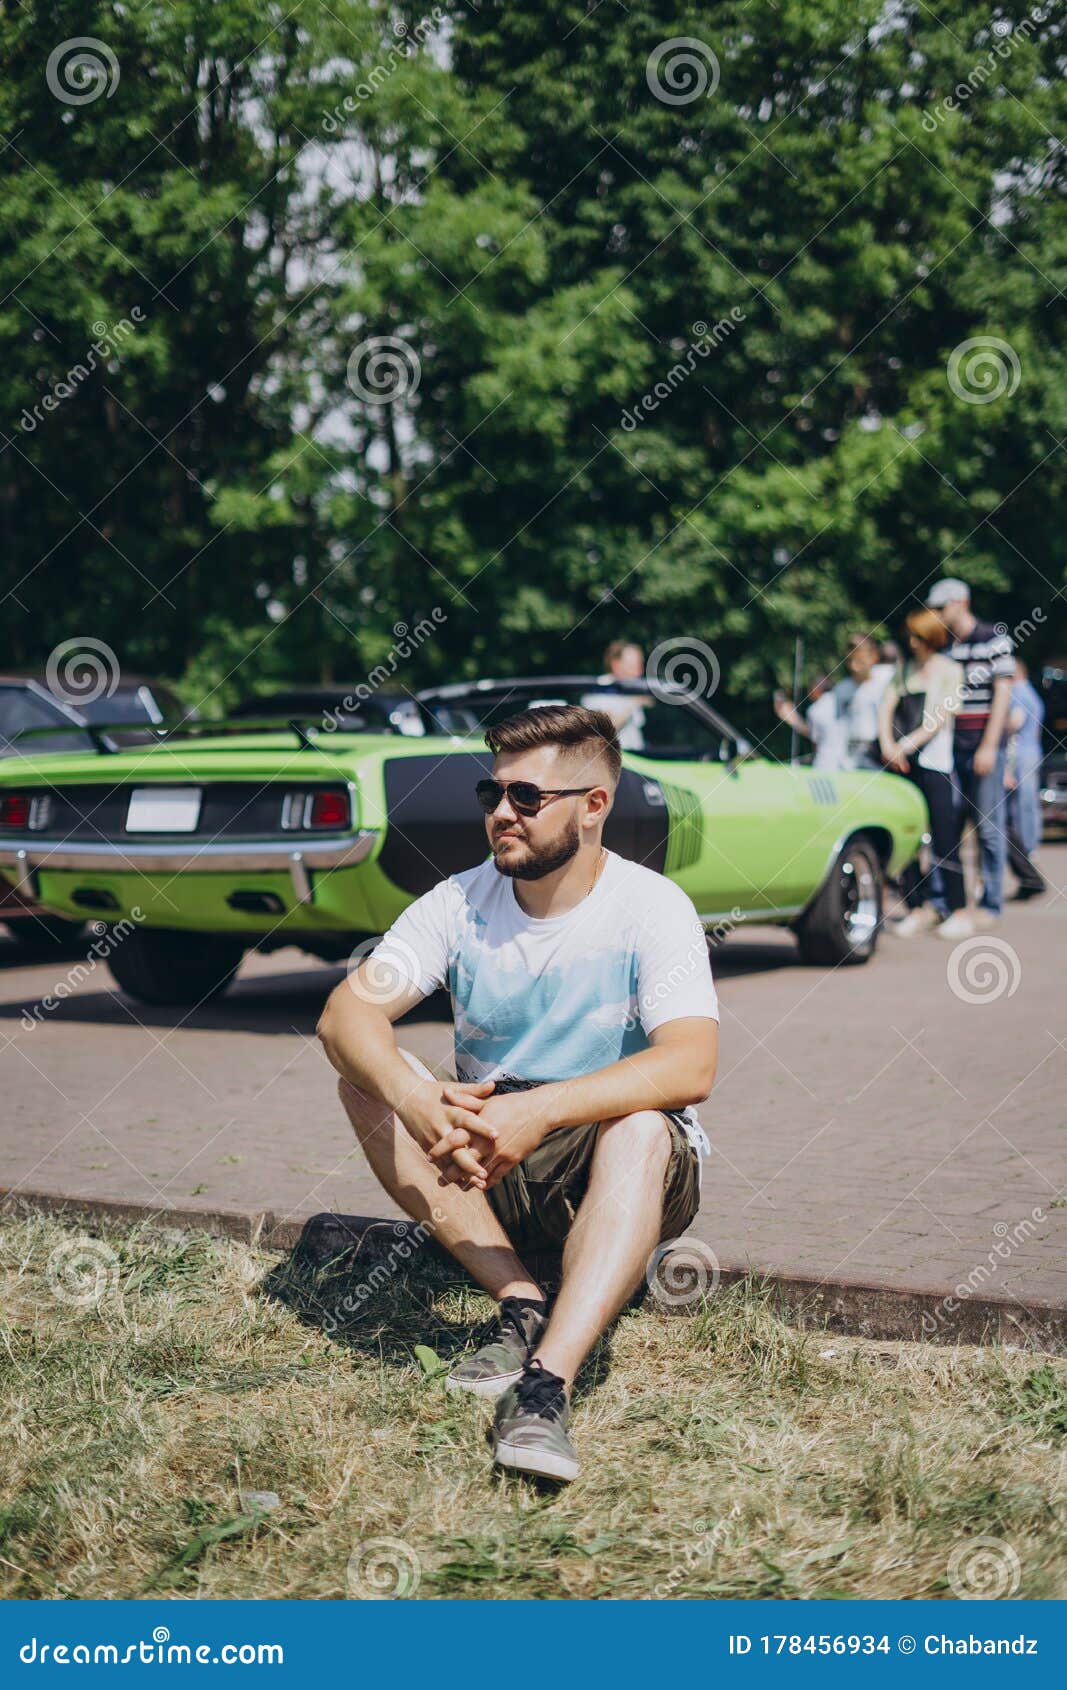 Young Man Sitting on Green Car Background Stock Photo - Image of beauty,  green: 178456934